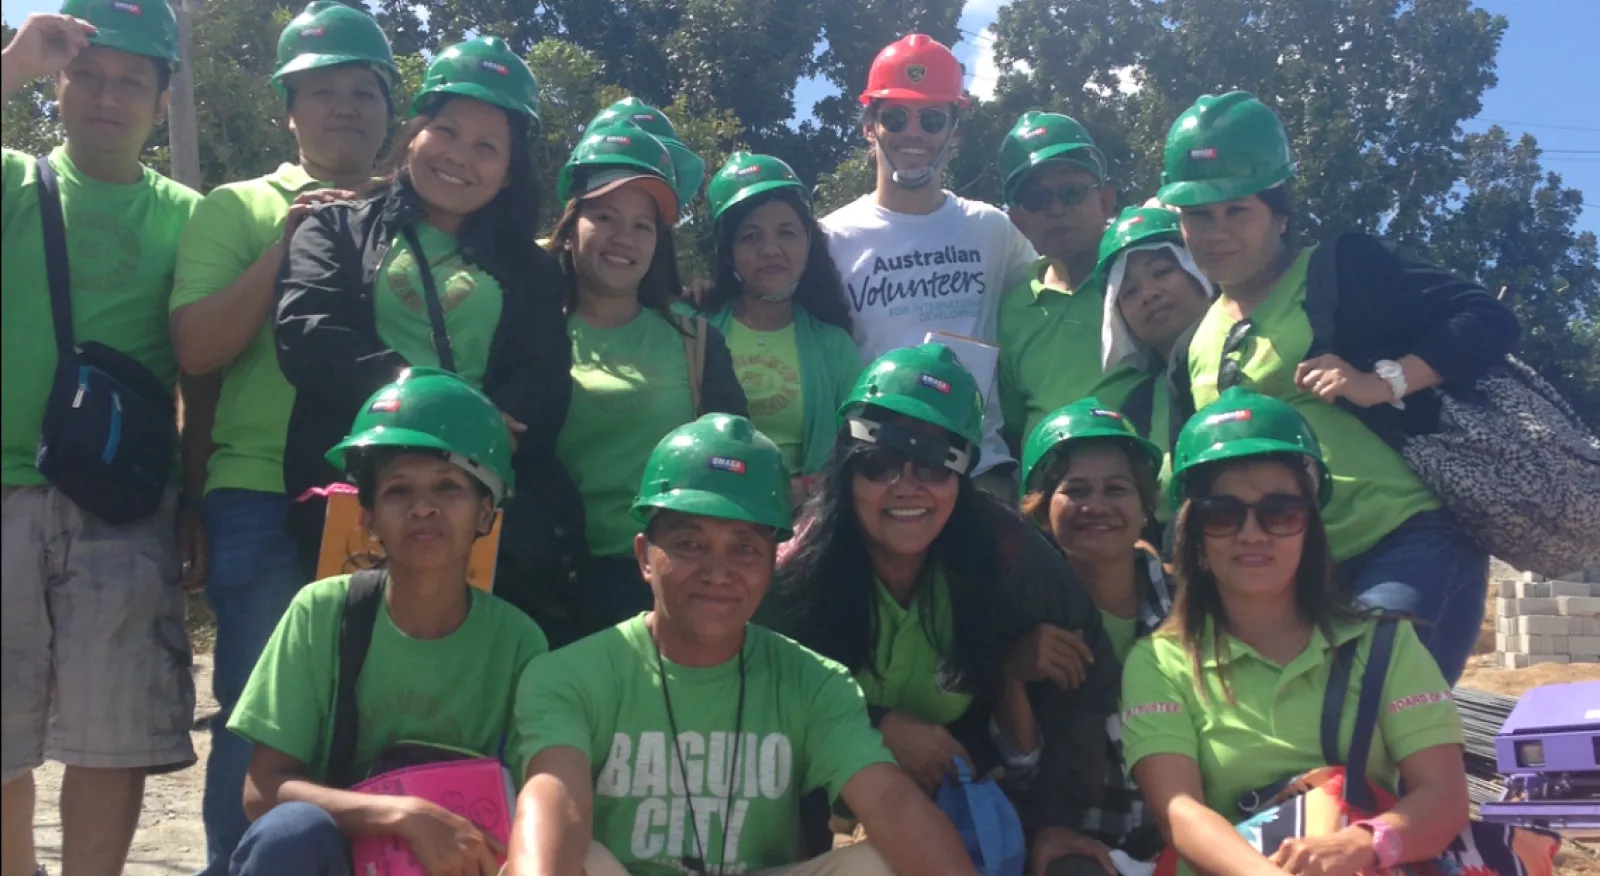 A group of people with green t-shirts wearing hard hats and smiling at the camera. One man has a white t-shirt and red hard hat.